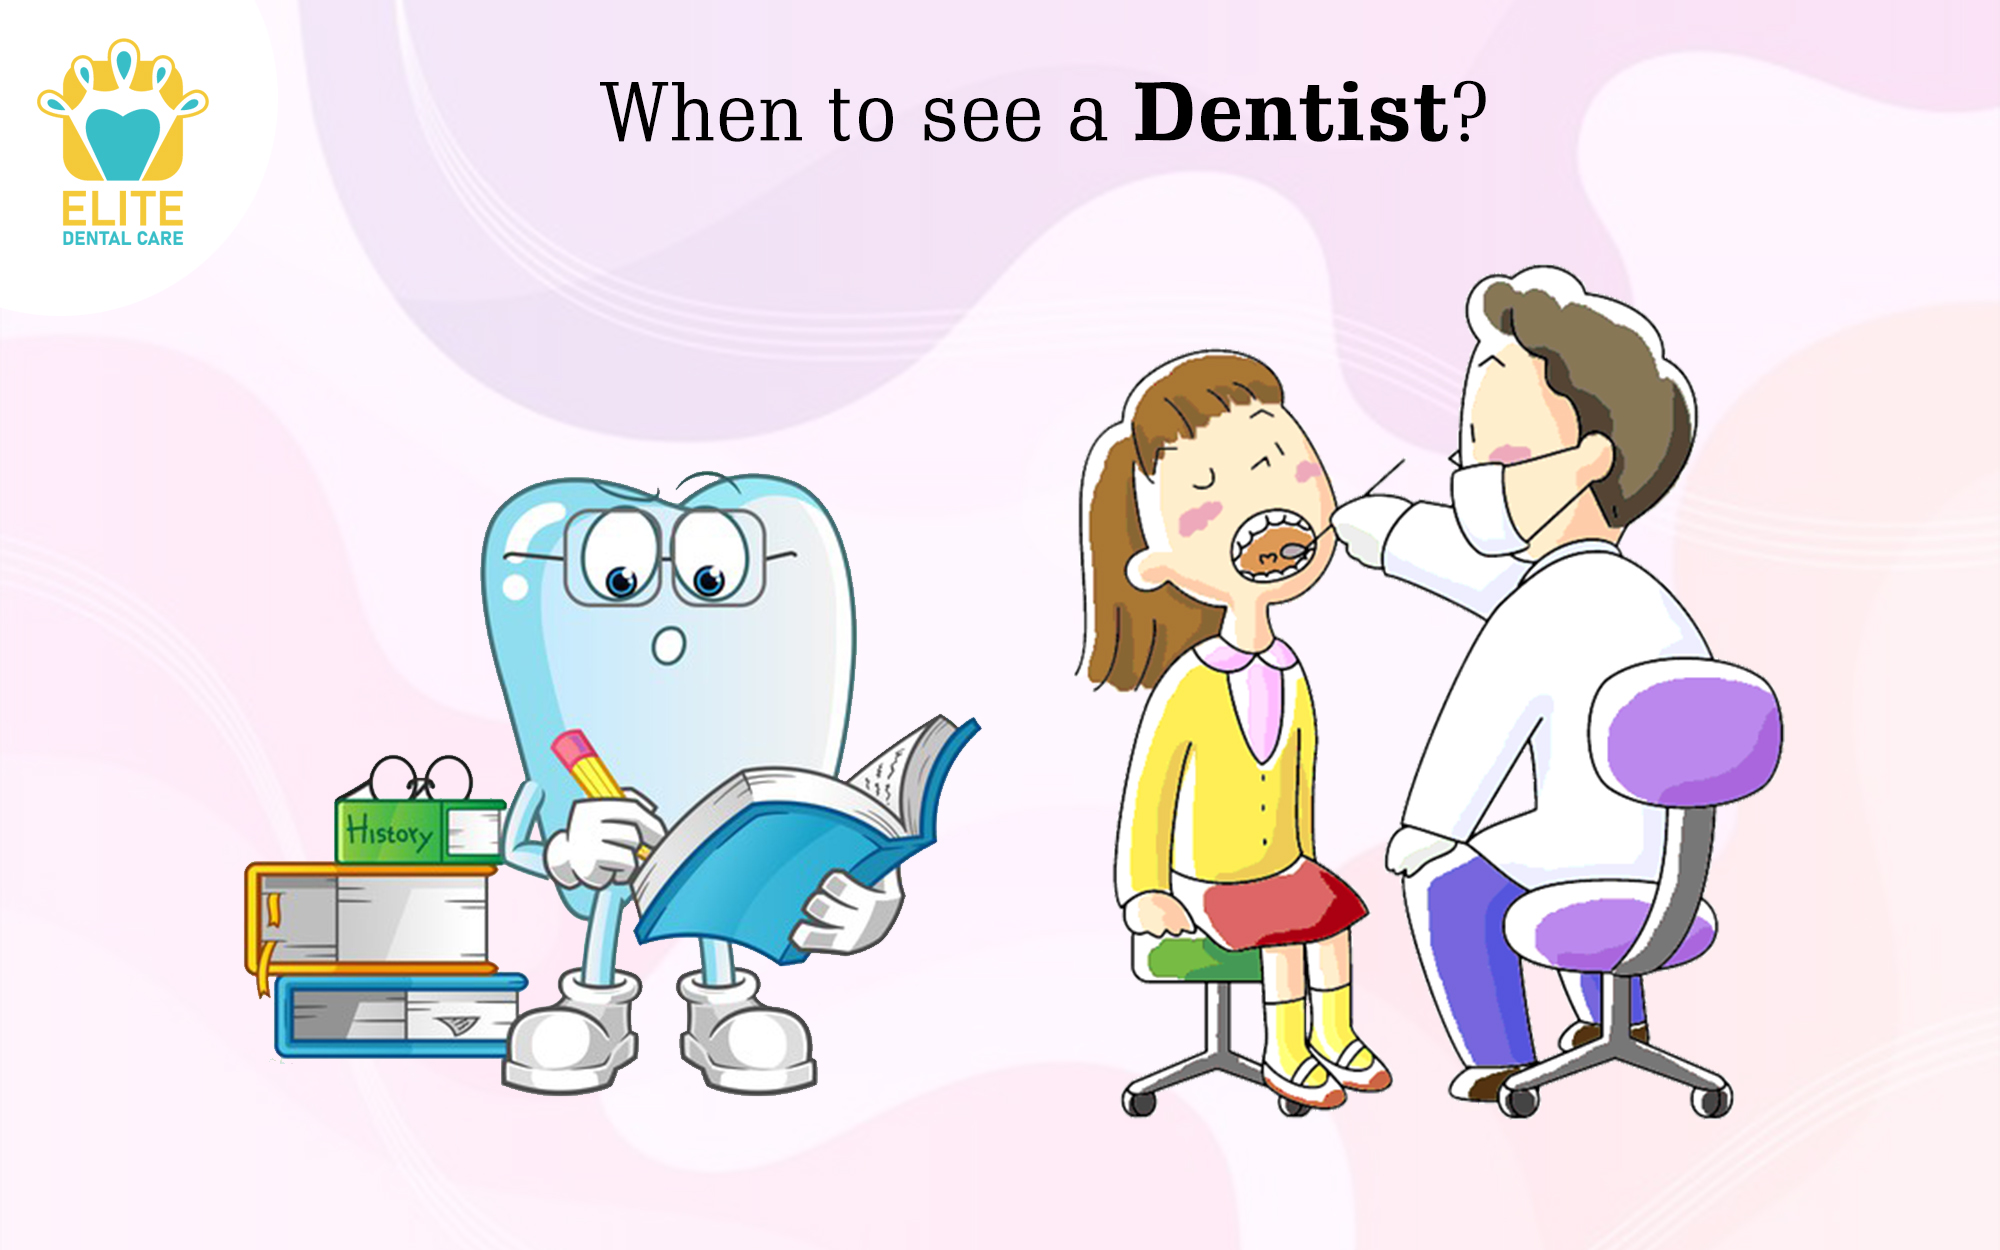 6 REASONS TO SEE A DENTIST